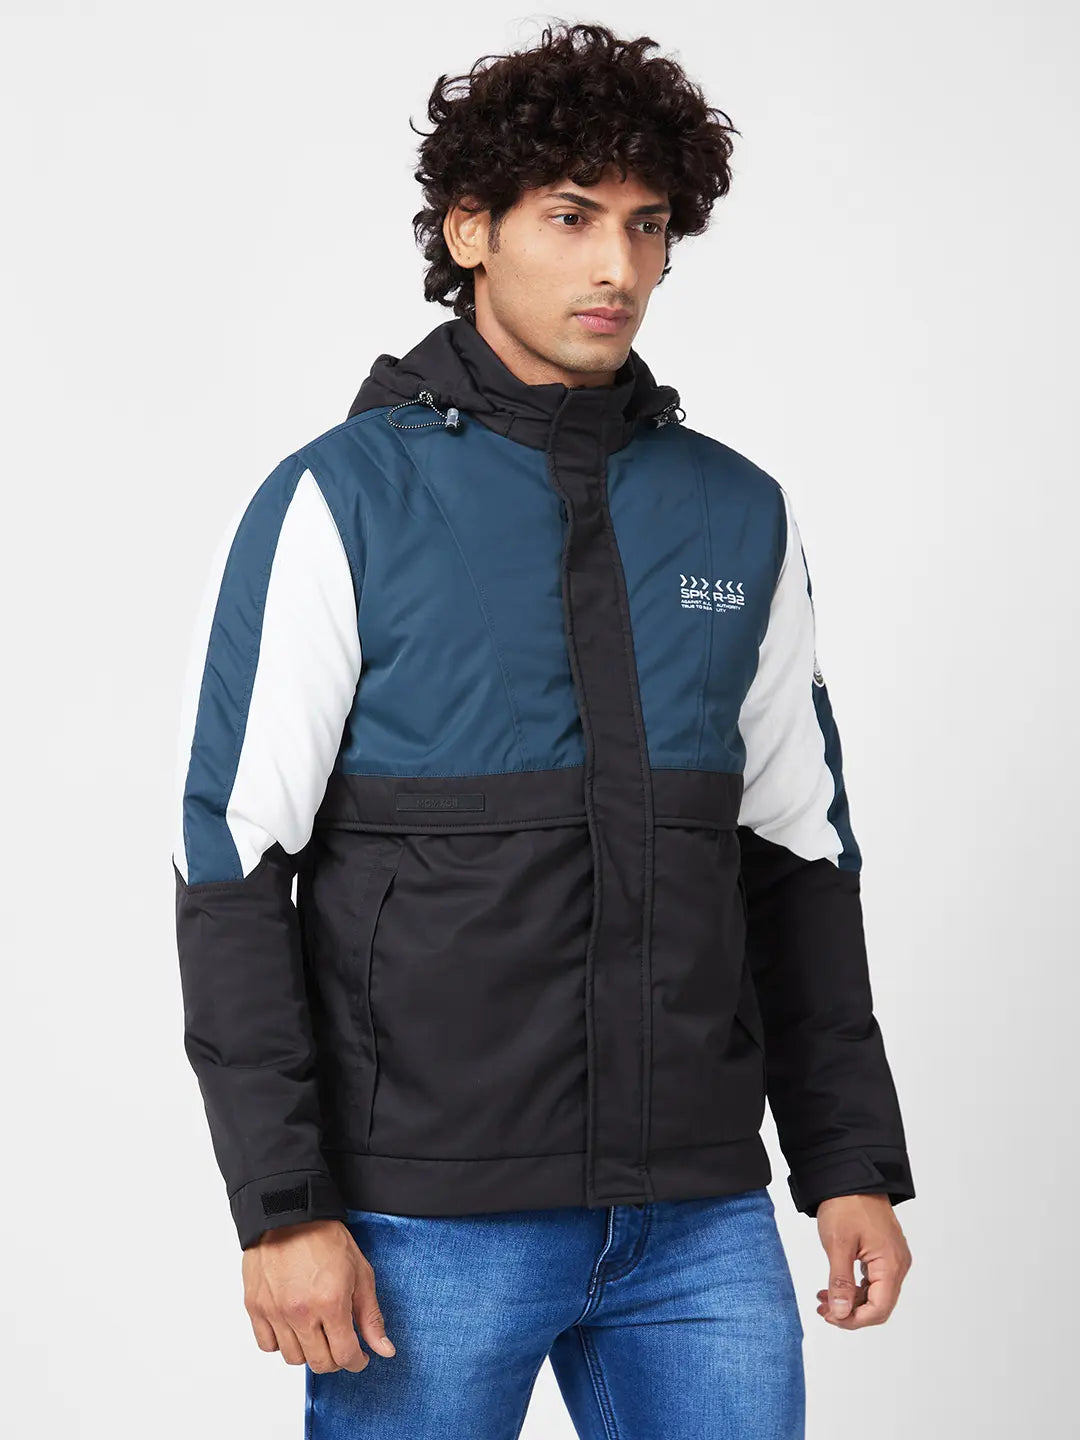 MEN'S SHELL COLOR BLOCKED JACKET WITH SLEEVE BADGE DETAIL.